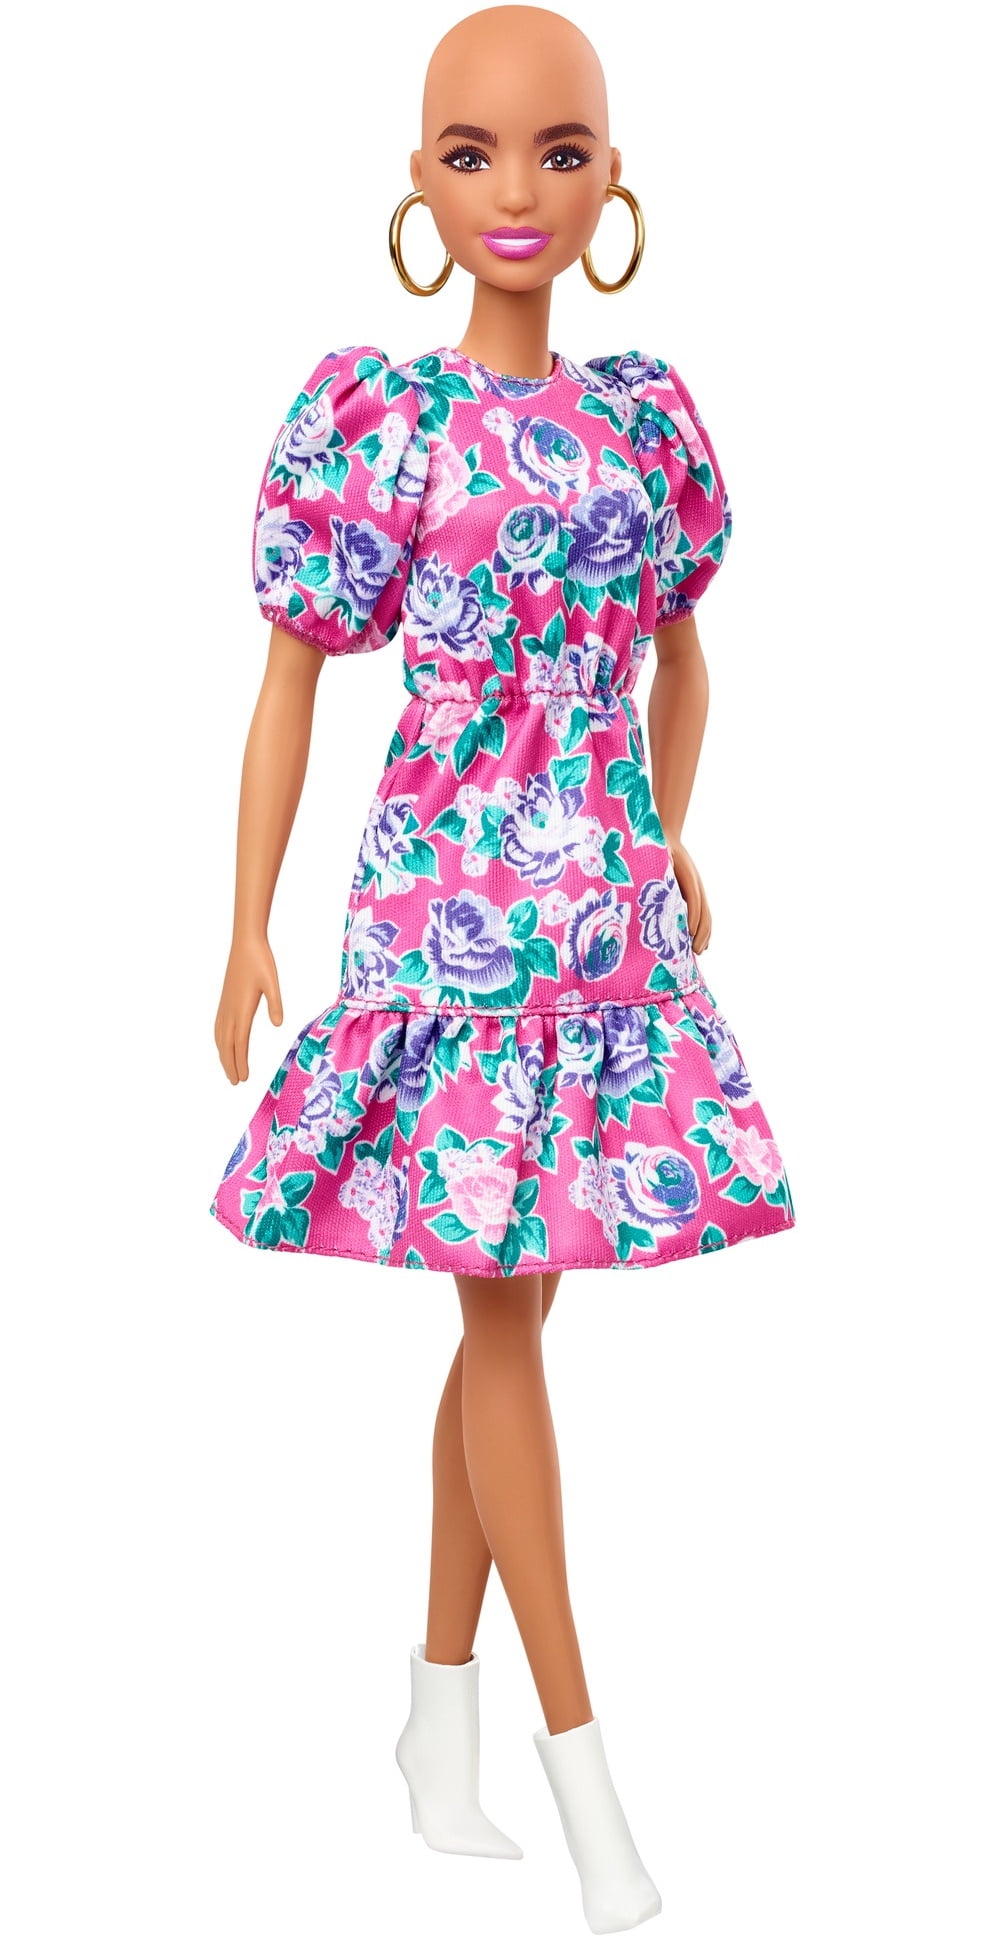 Purple Knee Length Dress Covered in Roses For Barbie Doll 